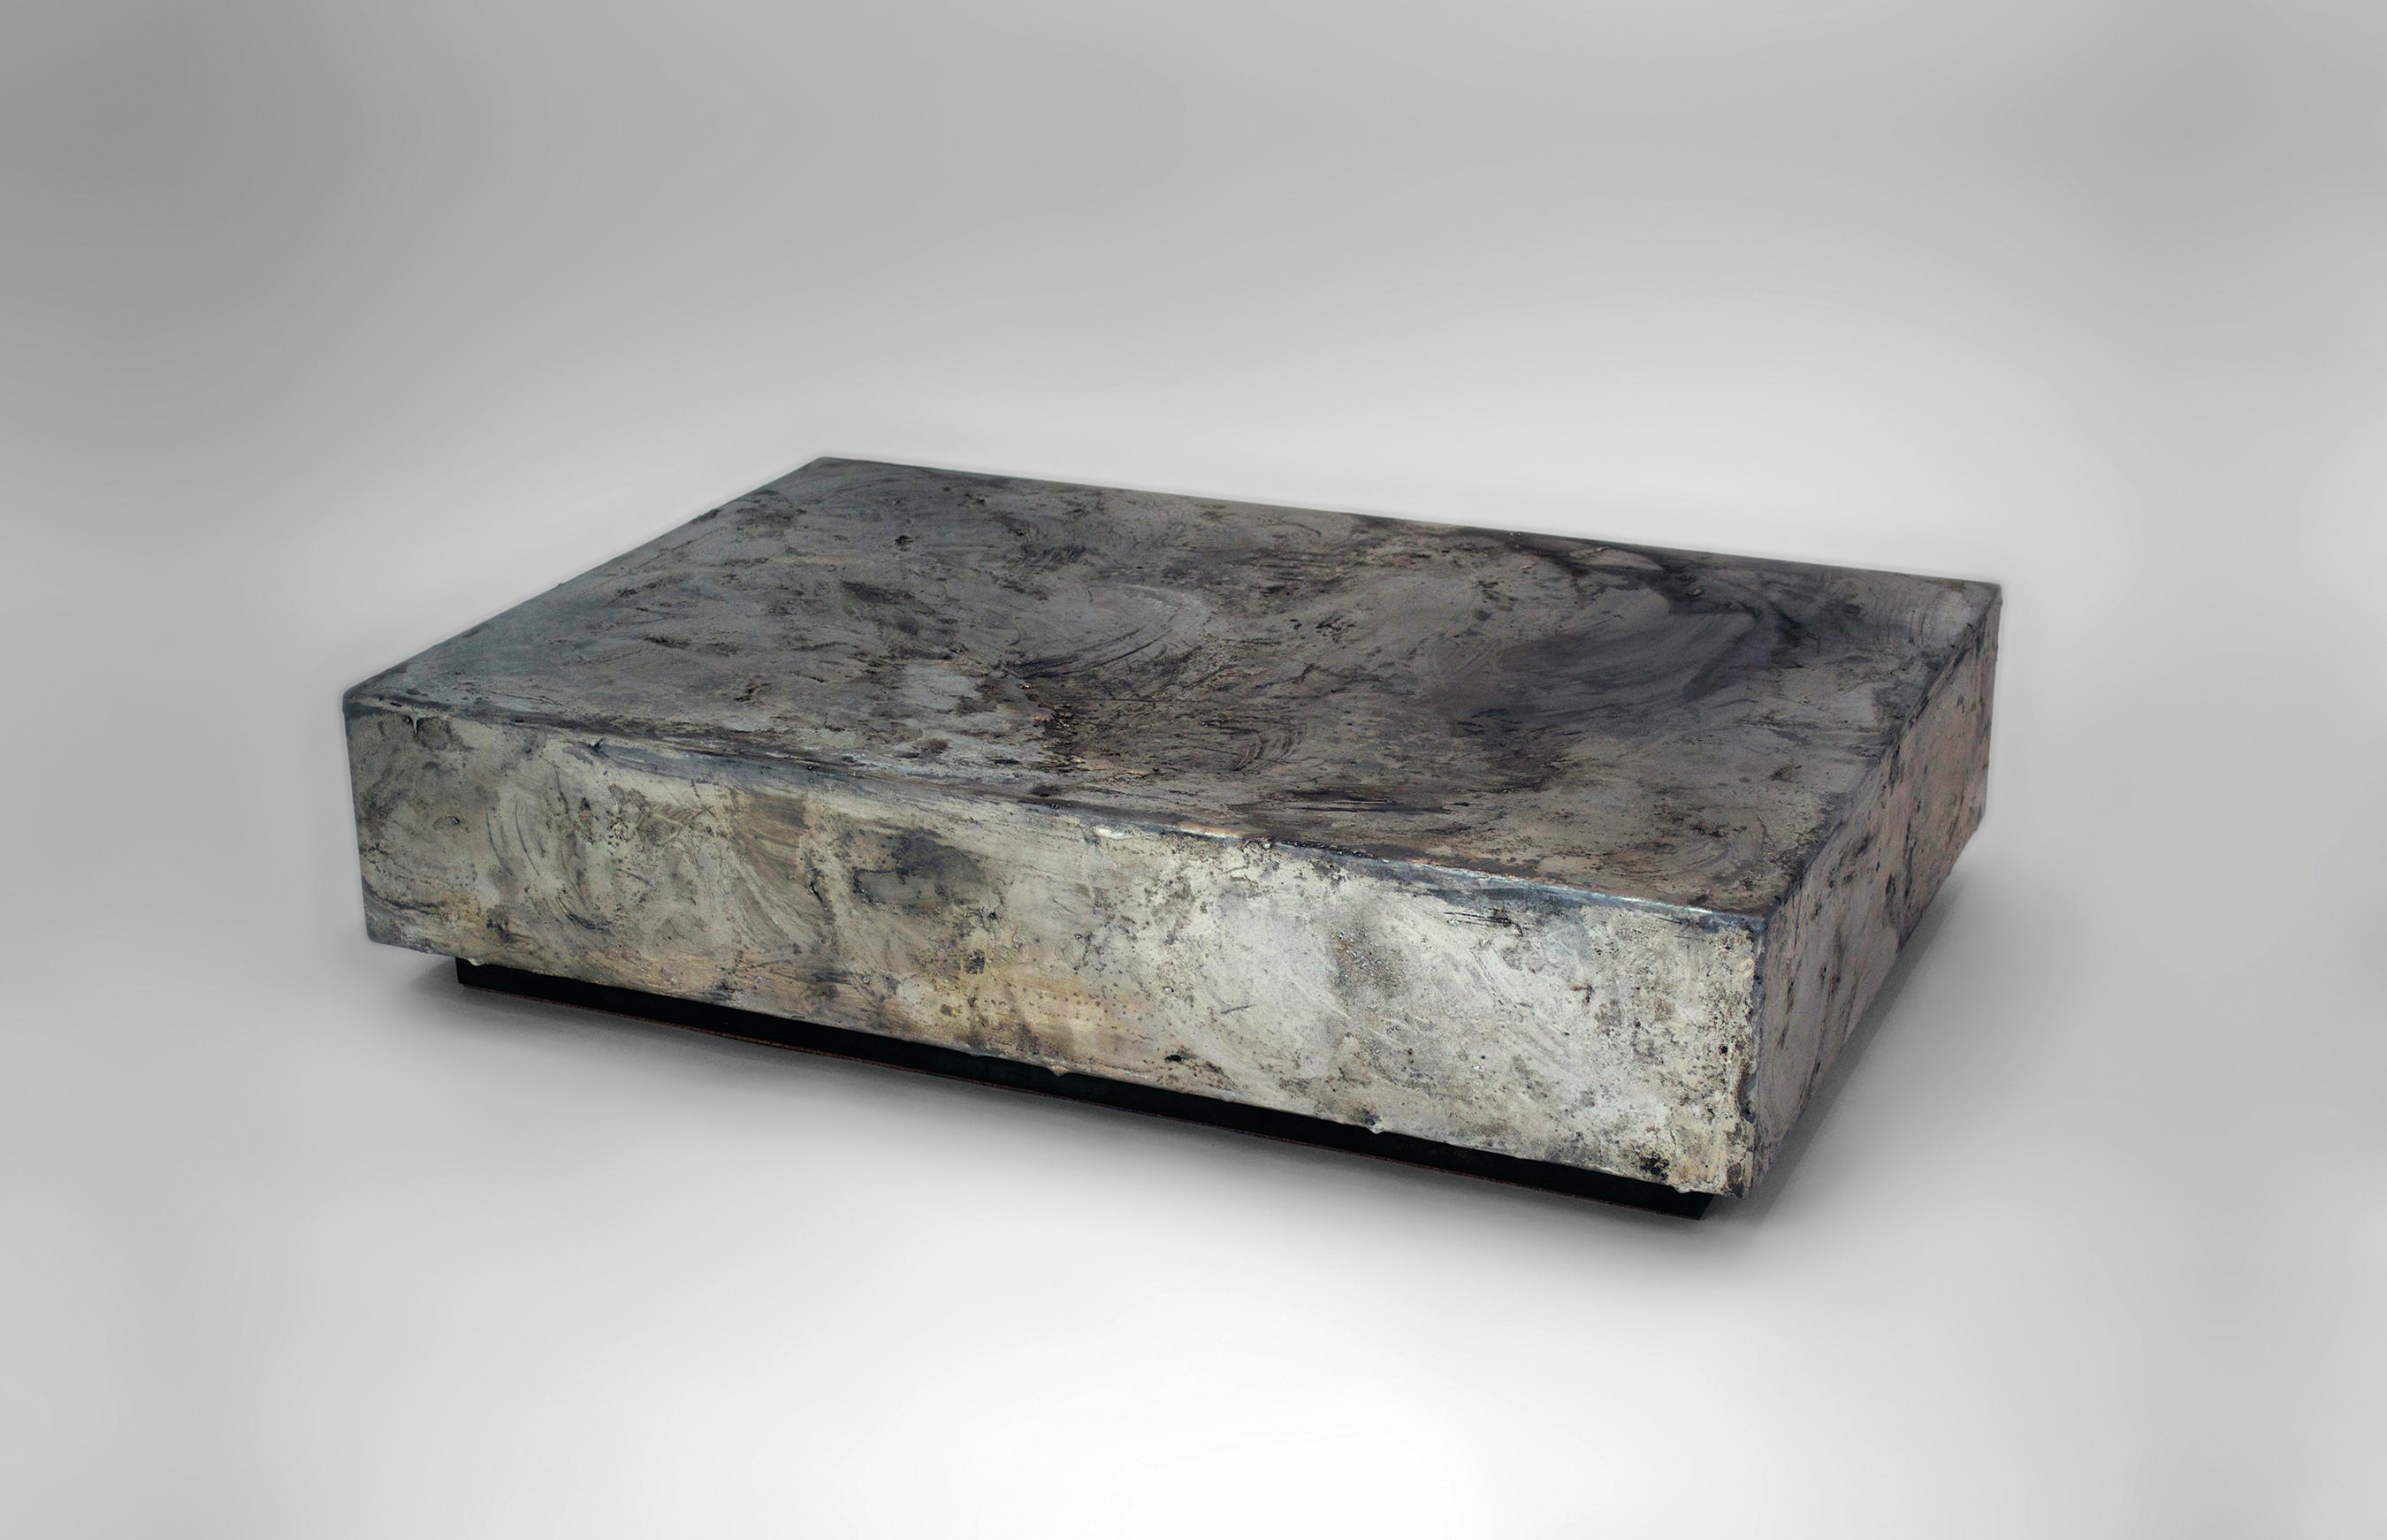 Pewter coffee table by Gentner Design
Dimensions: D 61 x W 91.5 x H 20.3 cm
Materials: pewter on steel.

The Pewter Collection is a family of furniture pieces defined by their materiality and formal qualities. One crucible at a time, pewter is